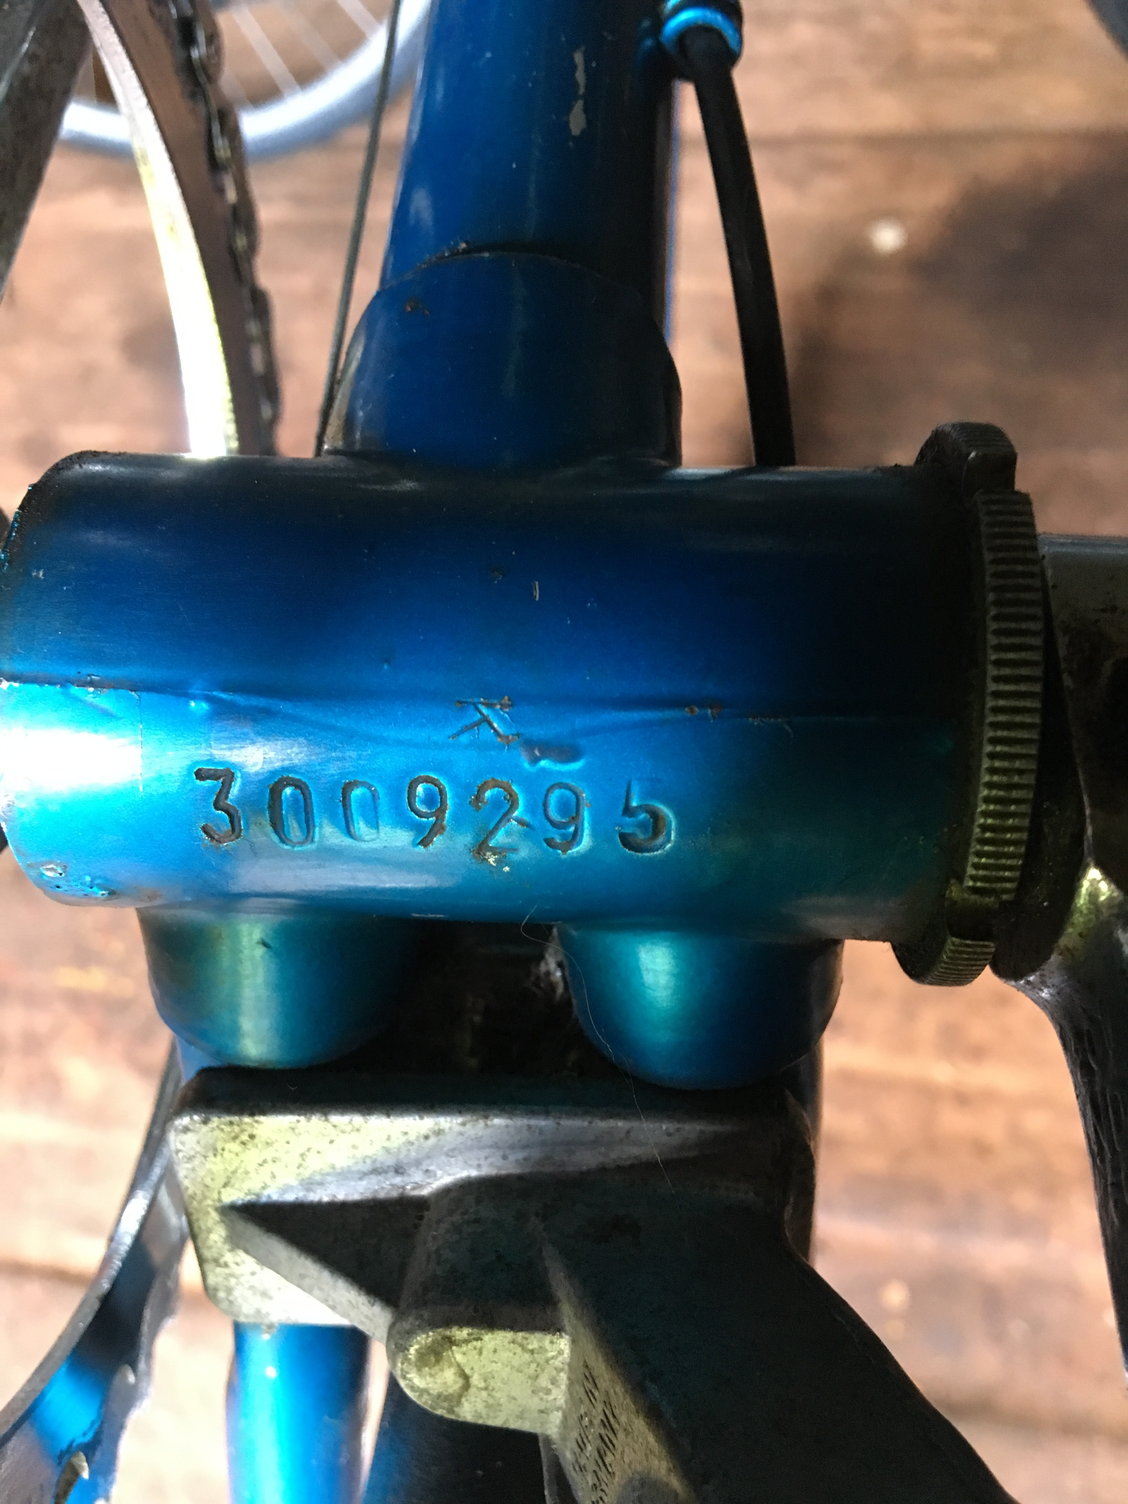 Bicycle serial number identification